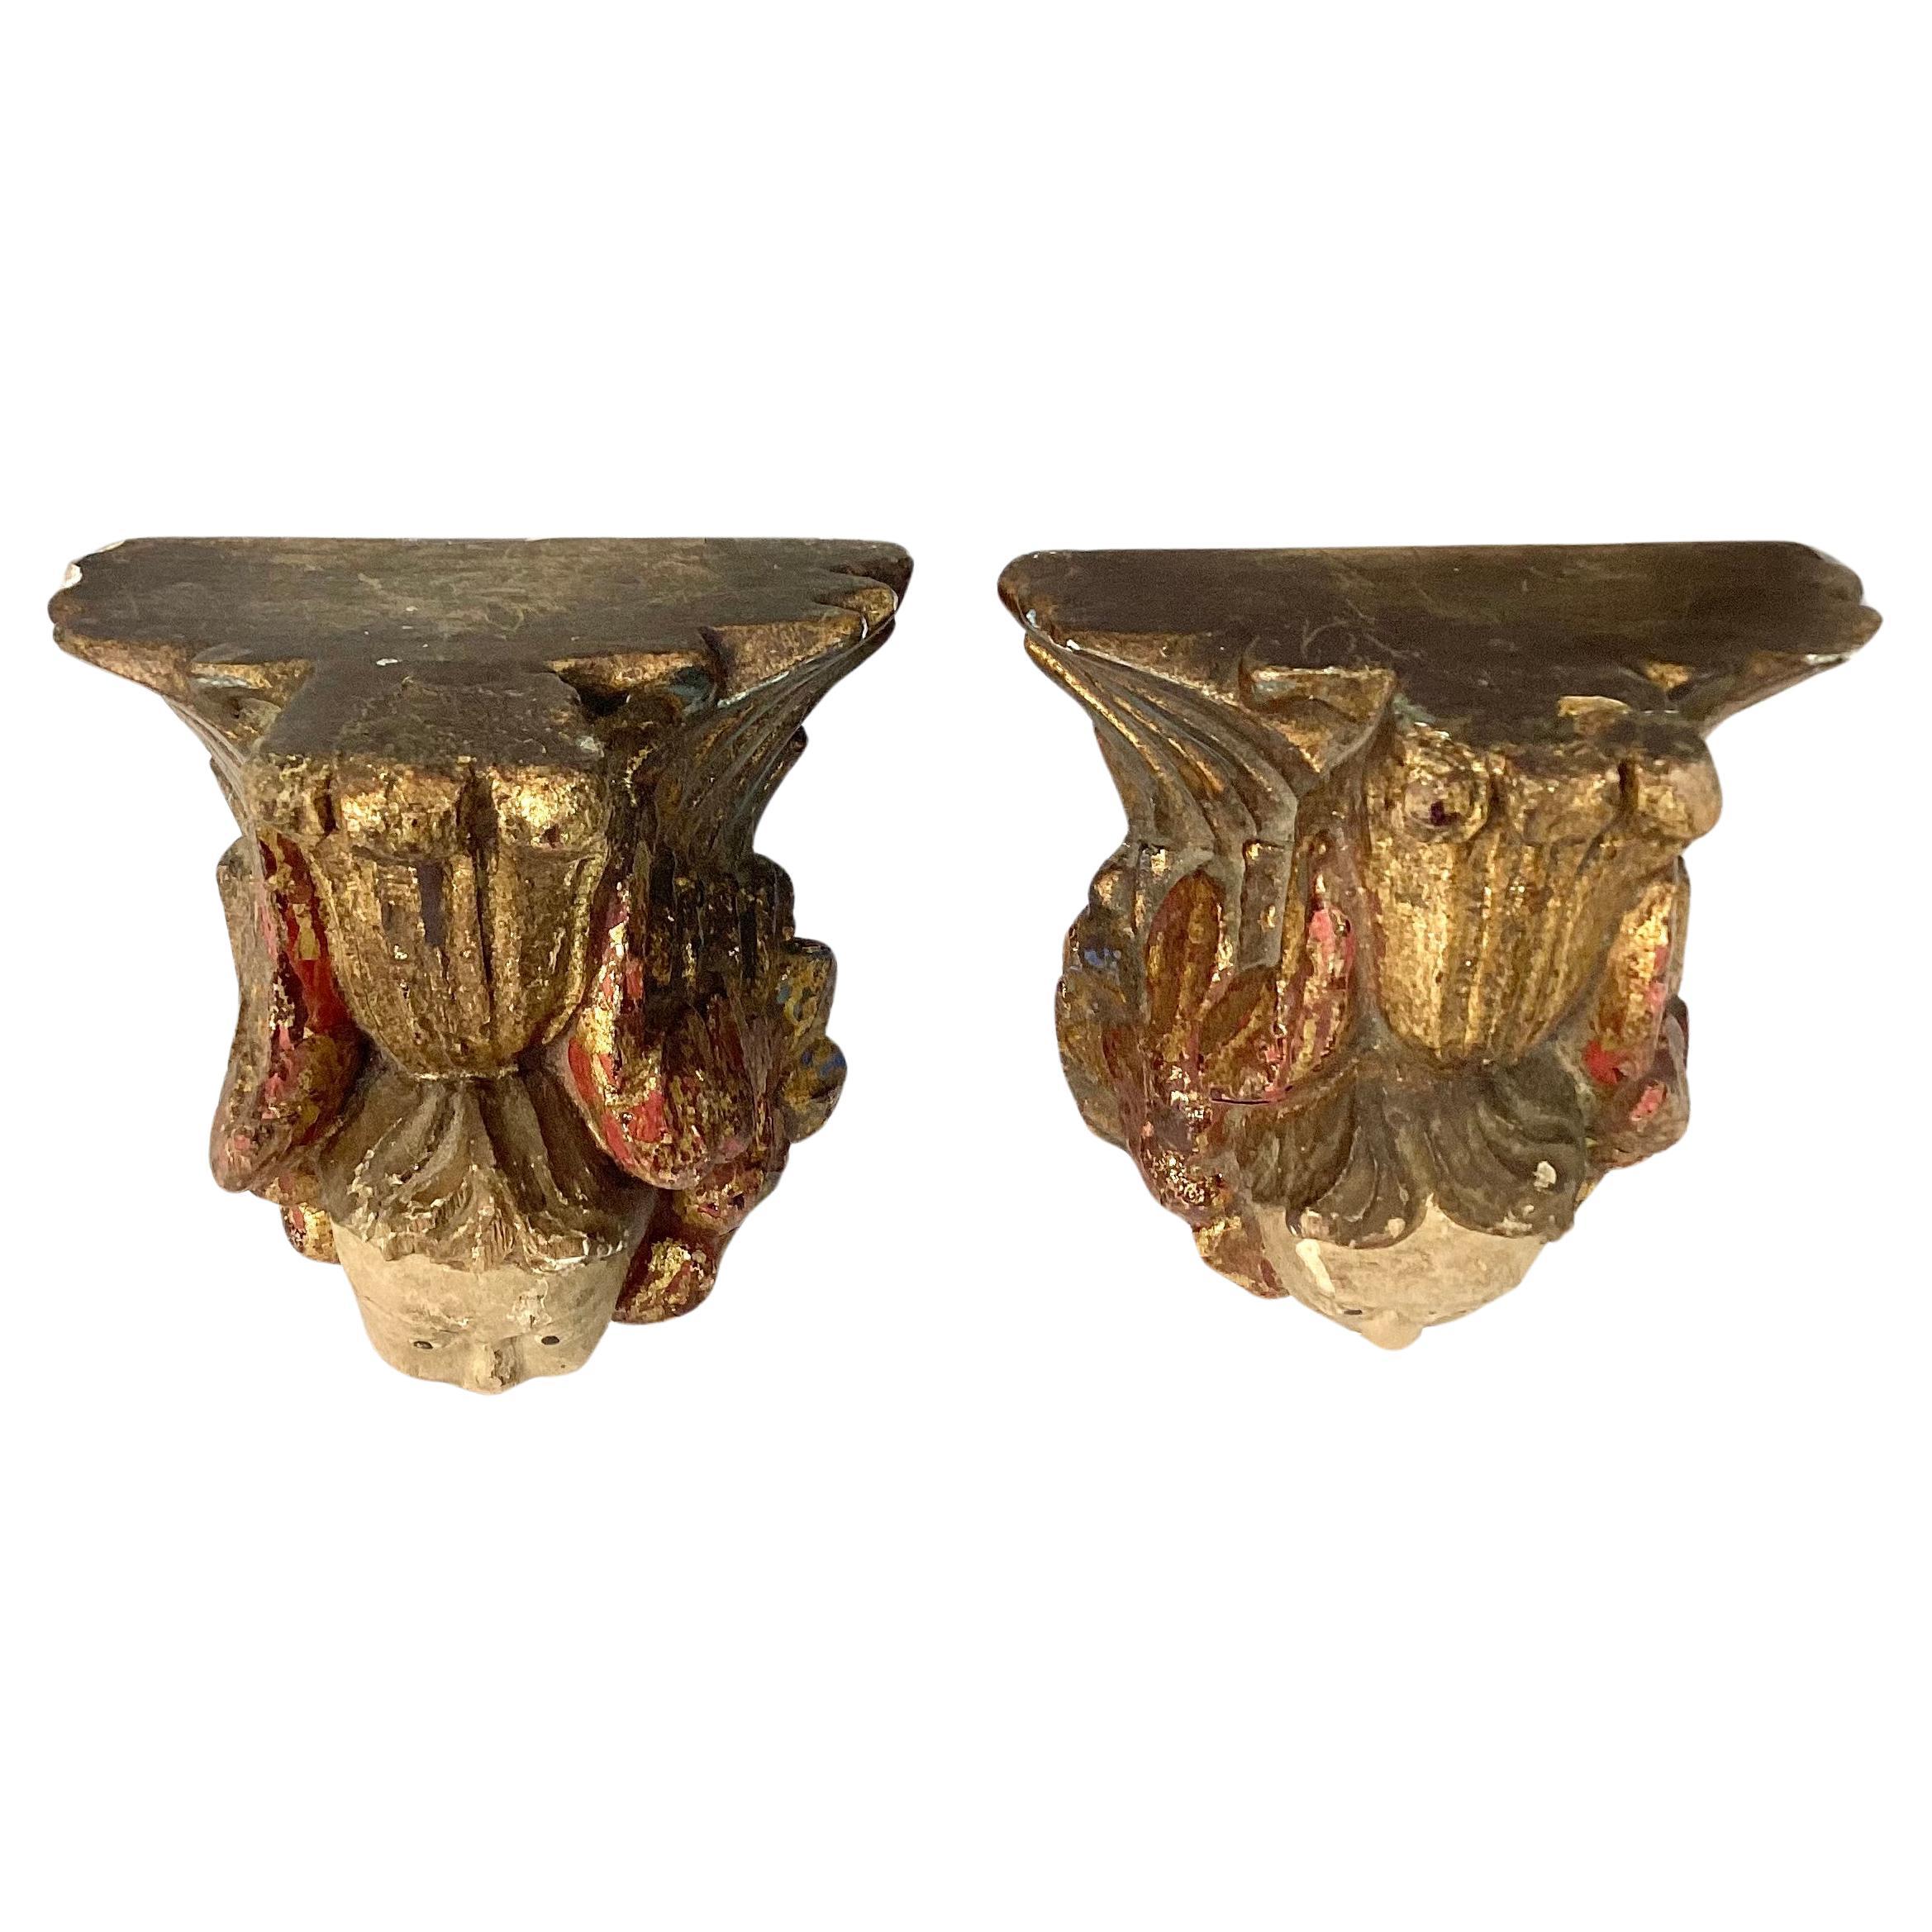 Pair of 18th Century Italian figural carved Angel wall brackets. Brackets feature charming angel faces under small flat shelf. Giltwood and painted, brackets have a wonderful old patina. Hooks on back for hanging. Pair would make a lovely addition